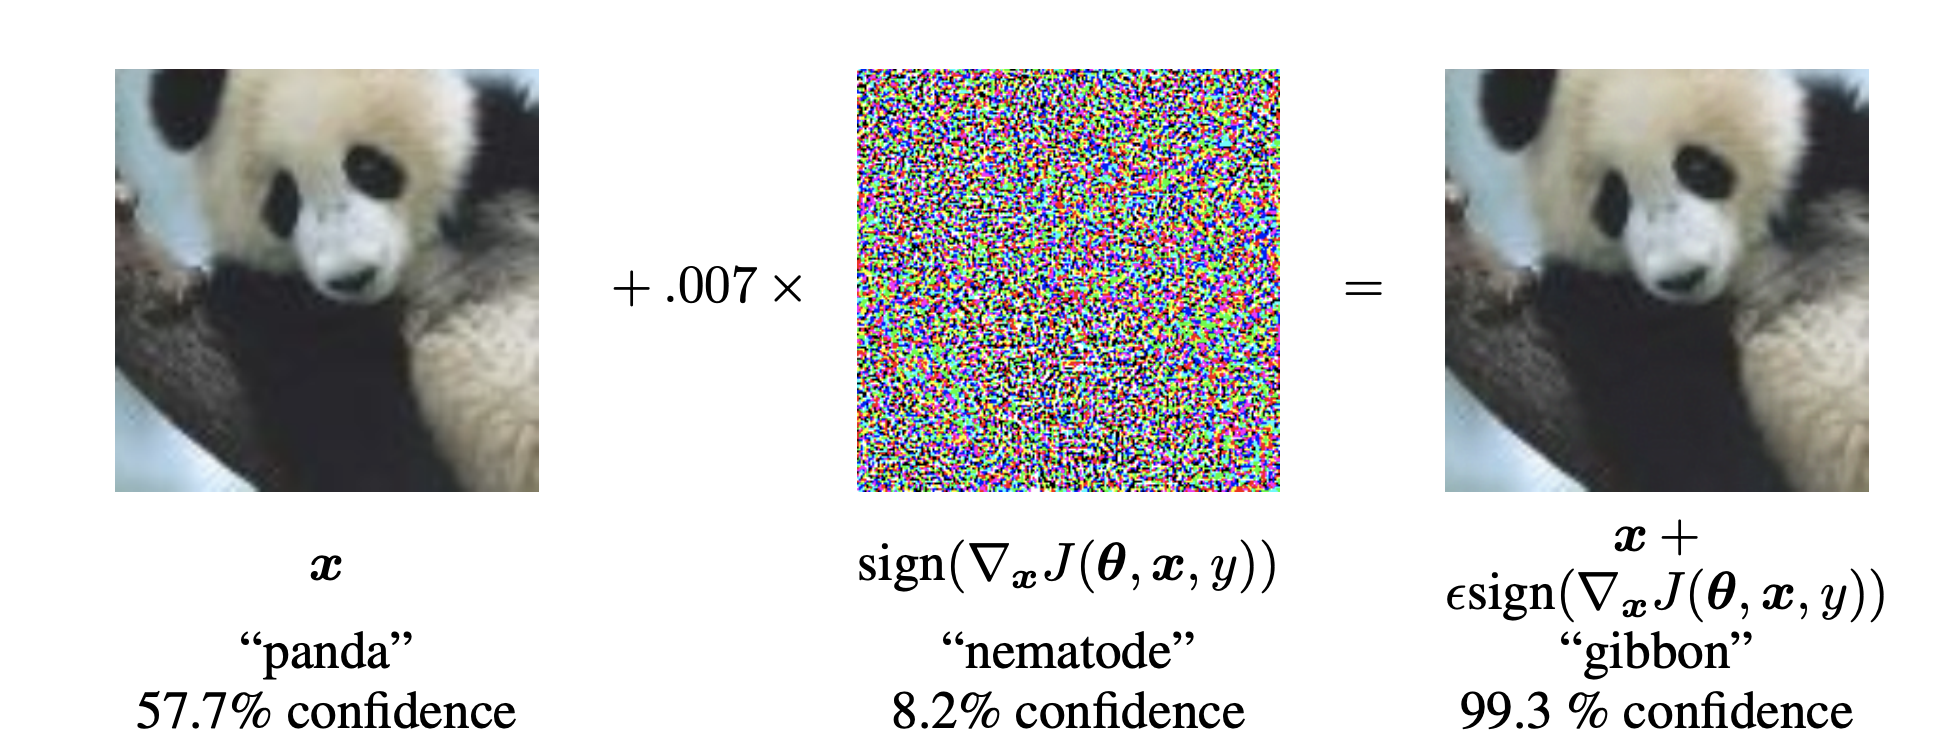 Adversarial Example (FGSM)